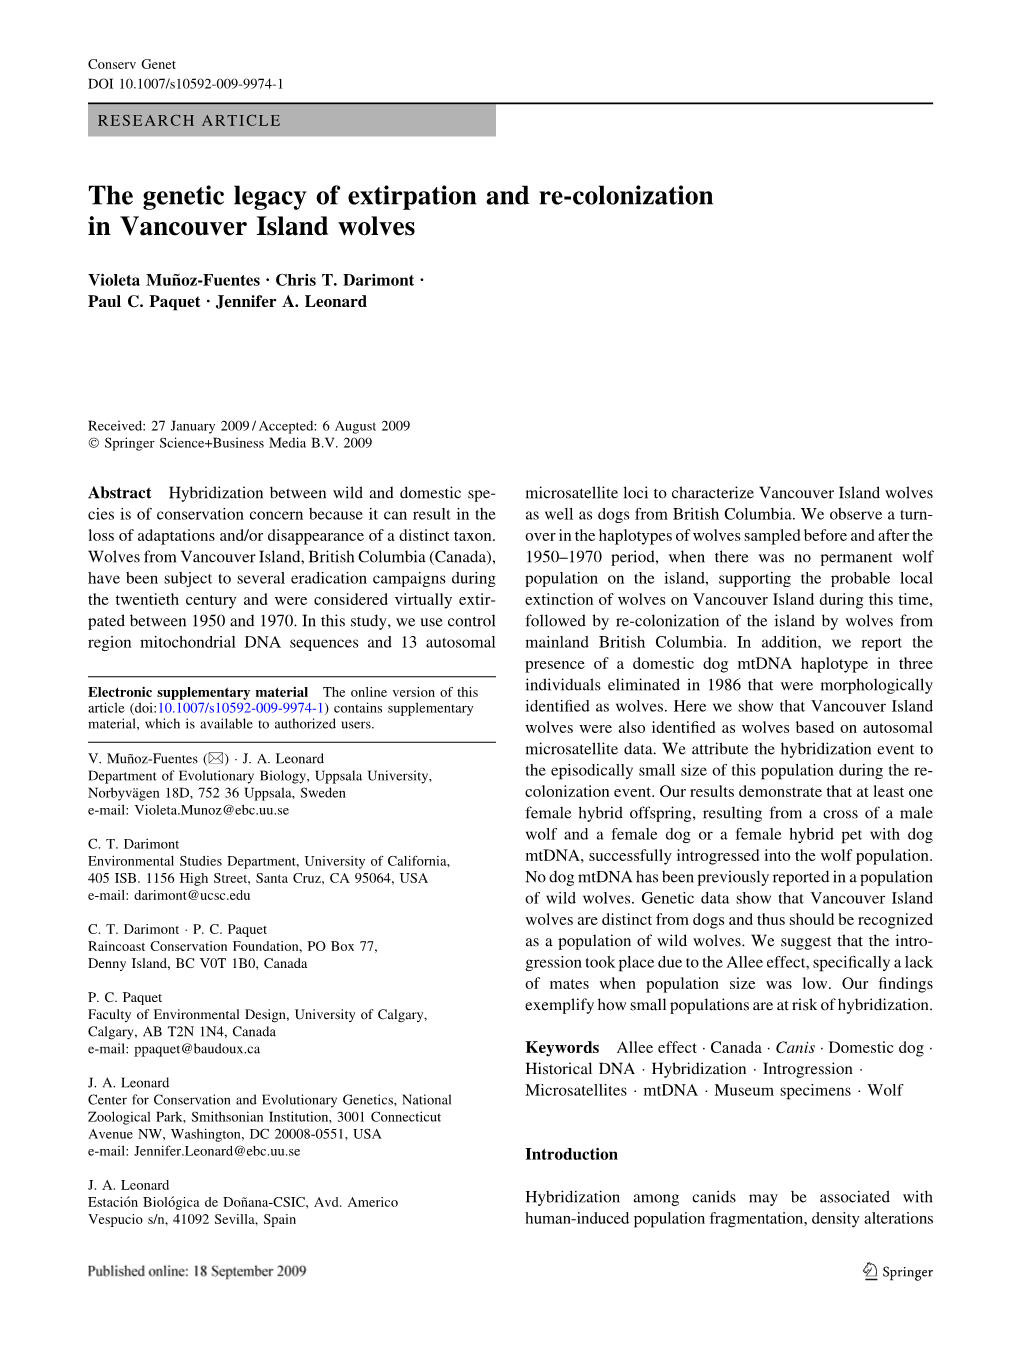 The Genetic Legacy of Extirpation and Re-Colonization in Vancouver Island Wolves